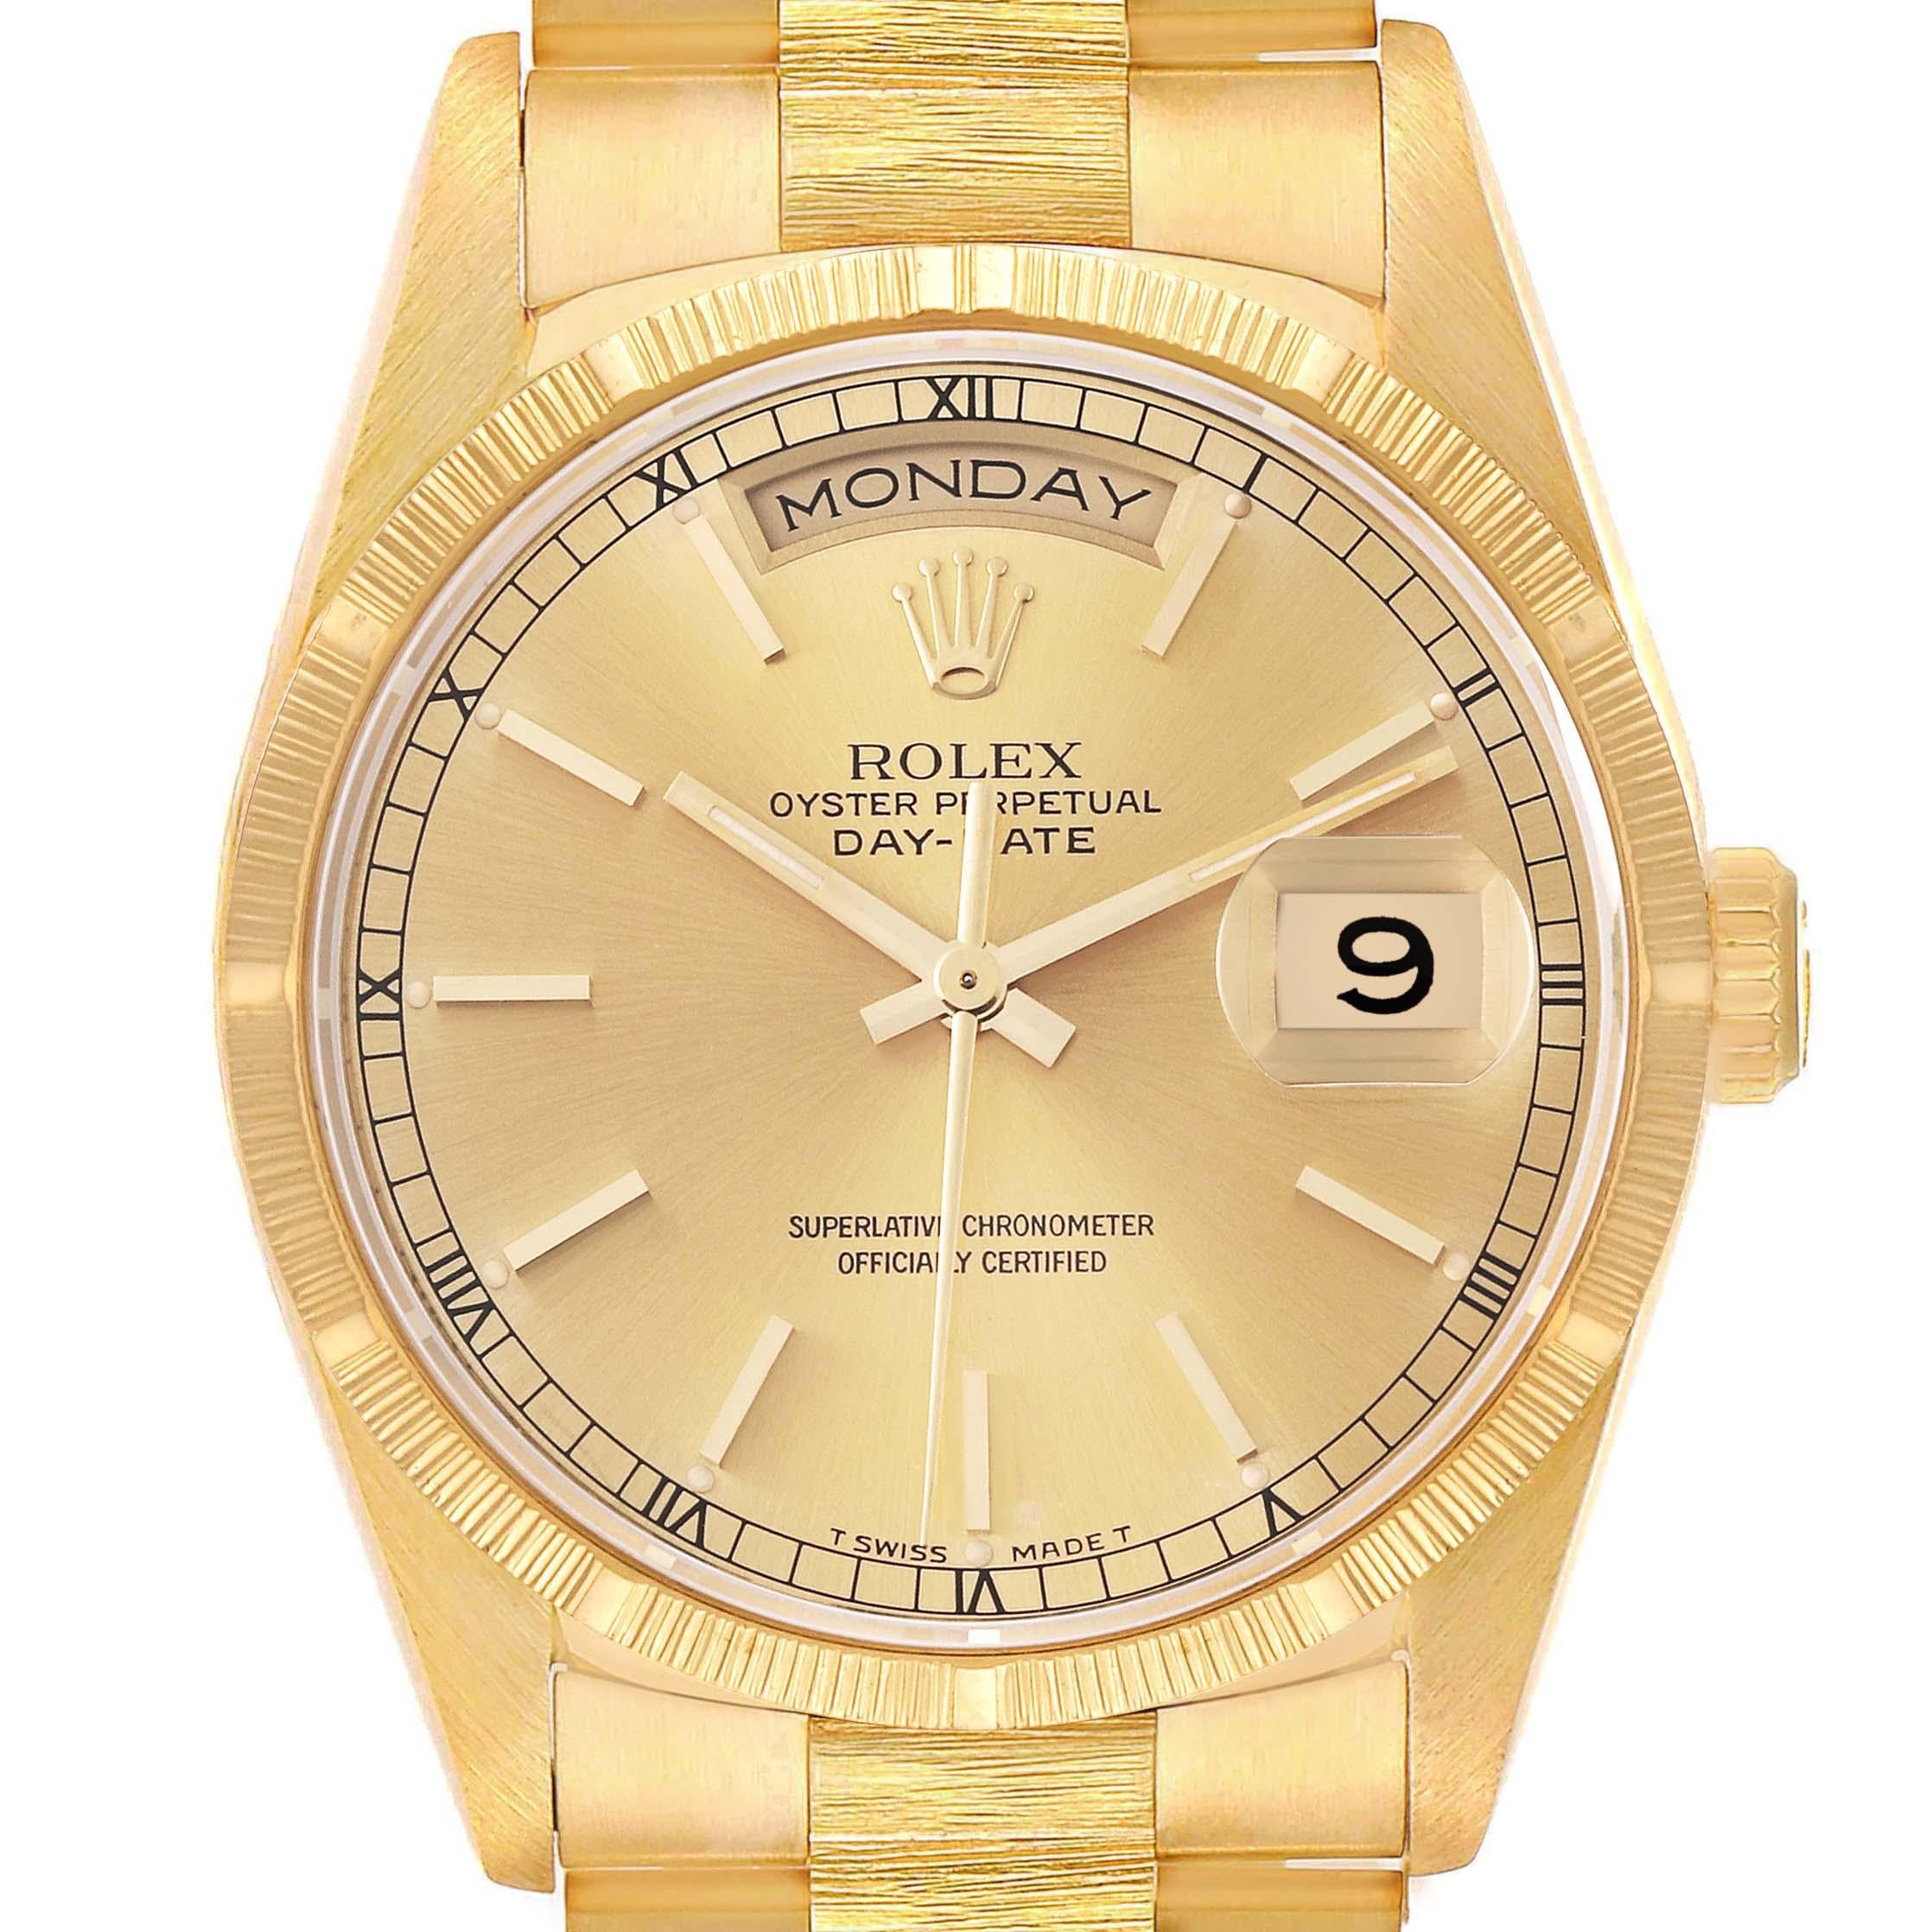 Rolex Day-Date President Yellow Gold Bark Finish Mens Watch 18248. Officially certified chronometer autmomatic self-winding movement. 18k yellow gold oyster case 36 mm in diameter. Rolex logo on a crown. 18k yellow gold bark finish bezel. Scratch